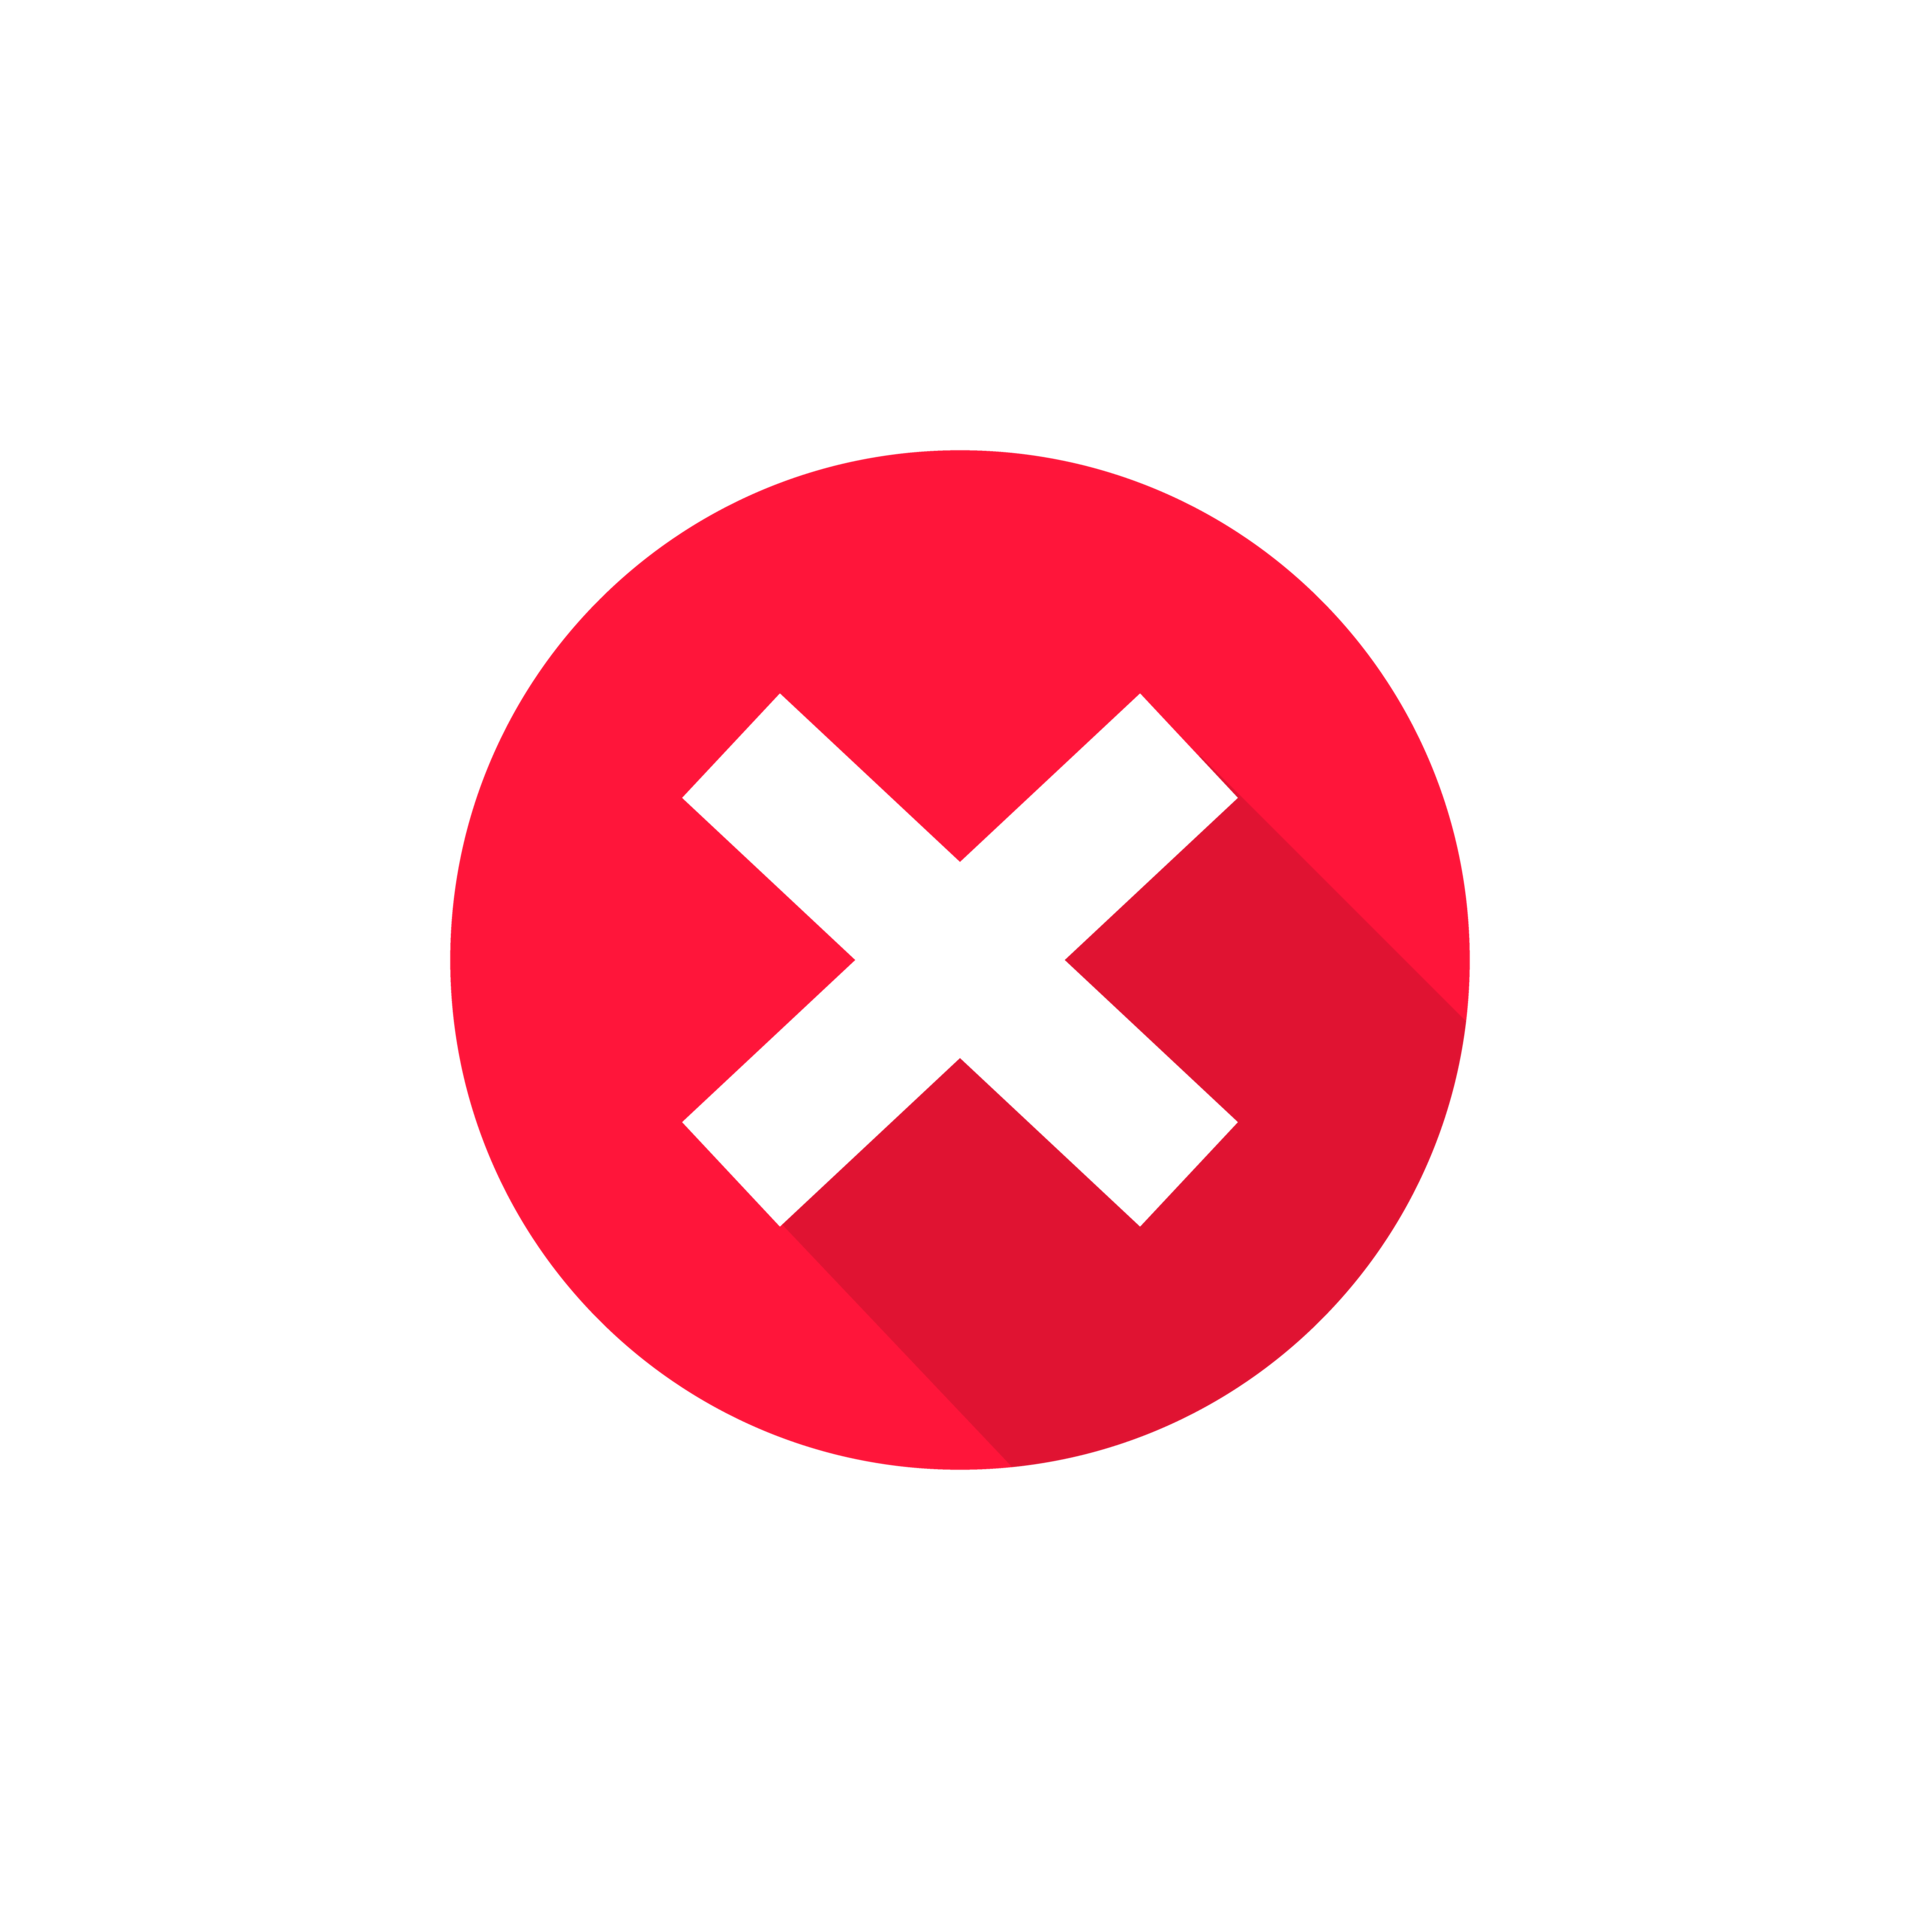 red cross icon for things that should not be done or forbidden 14313137 PNG